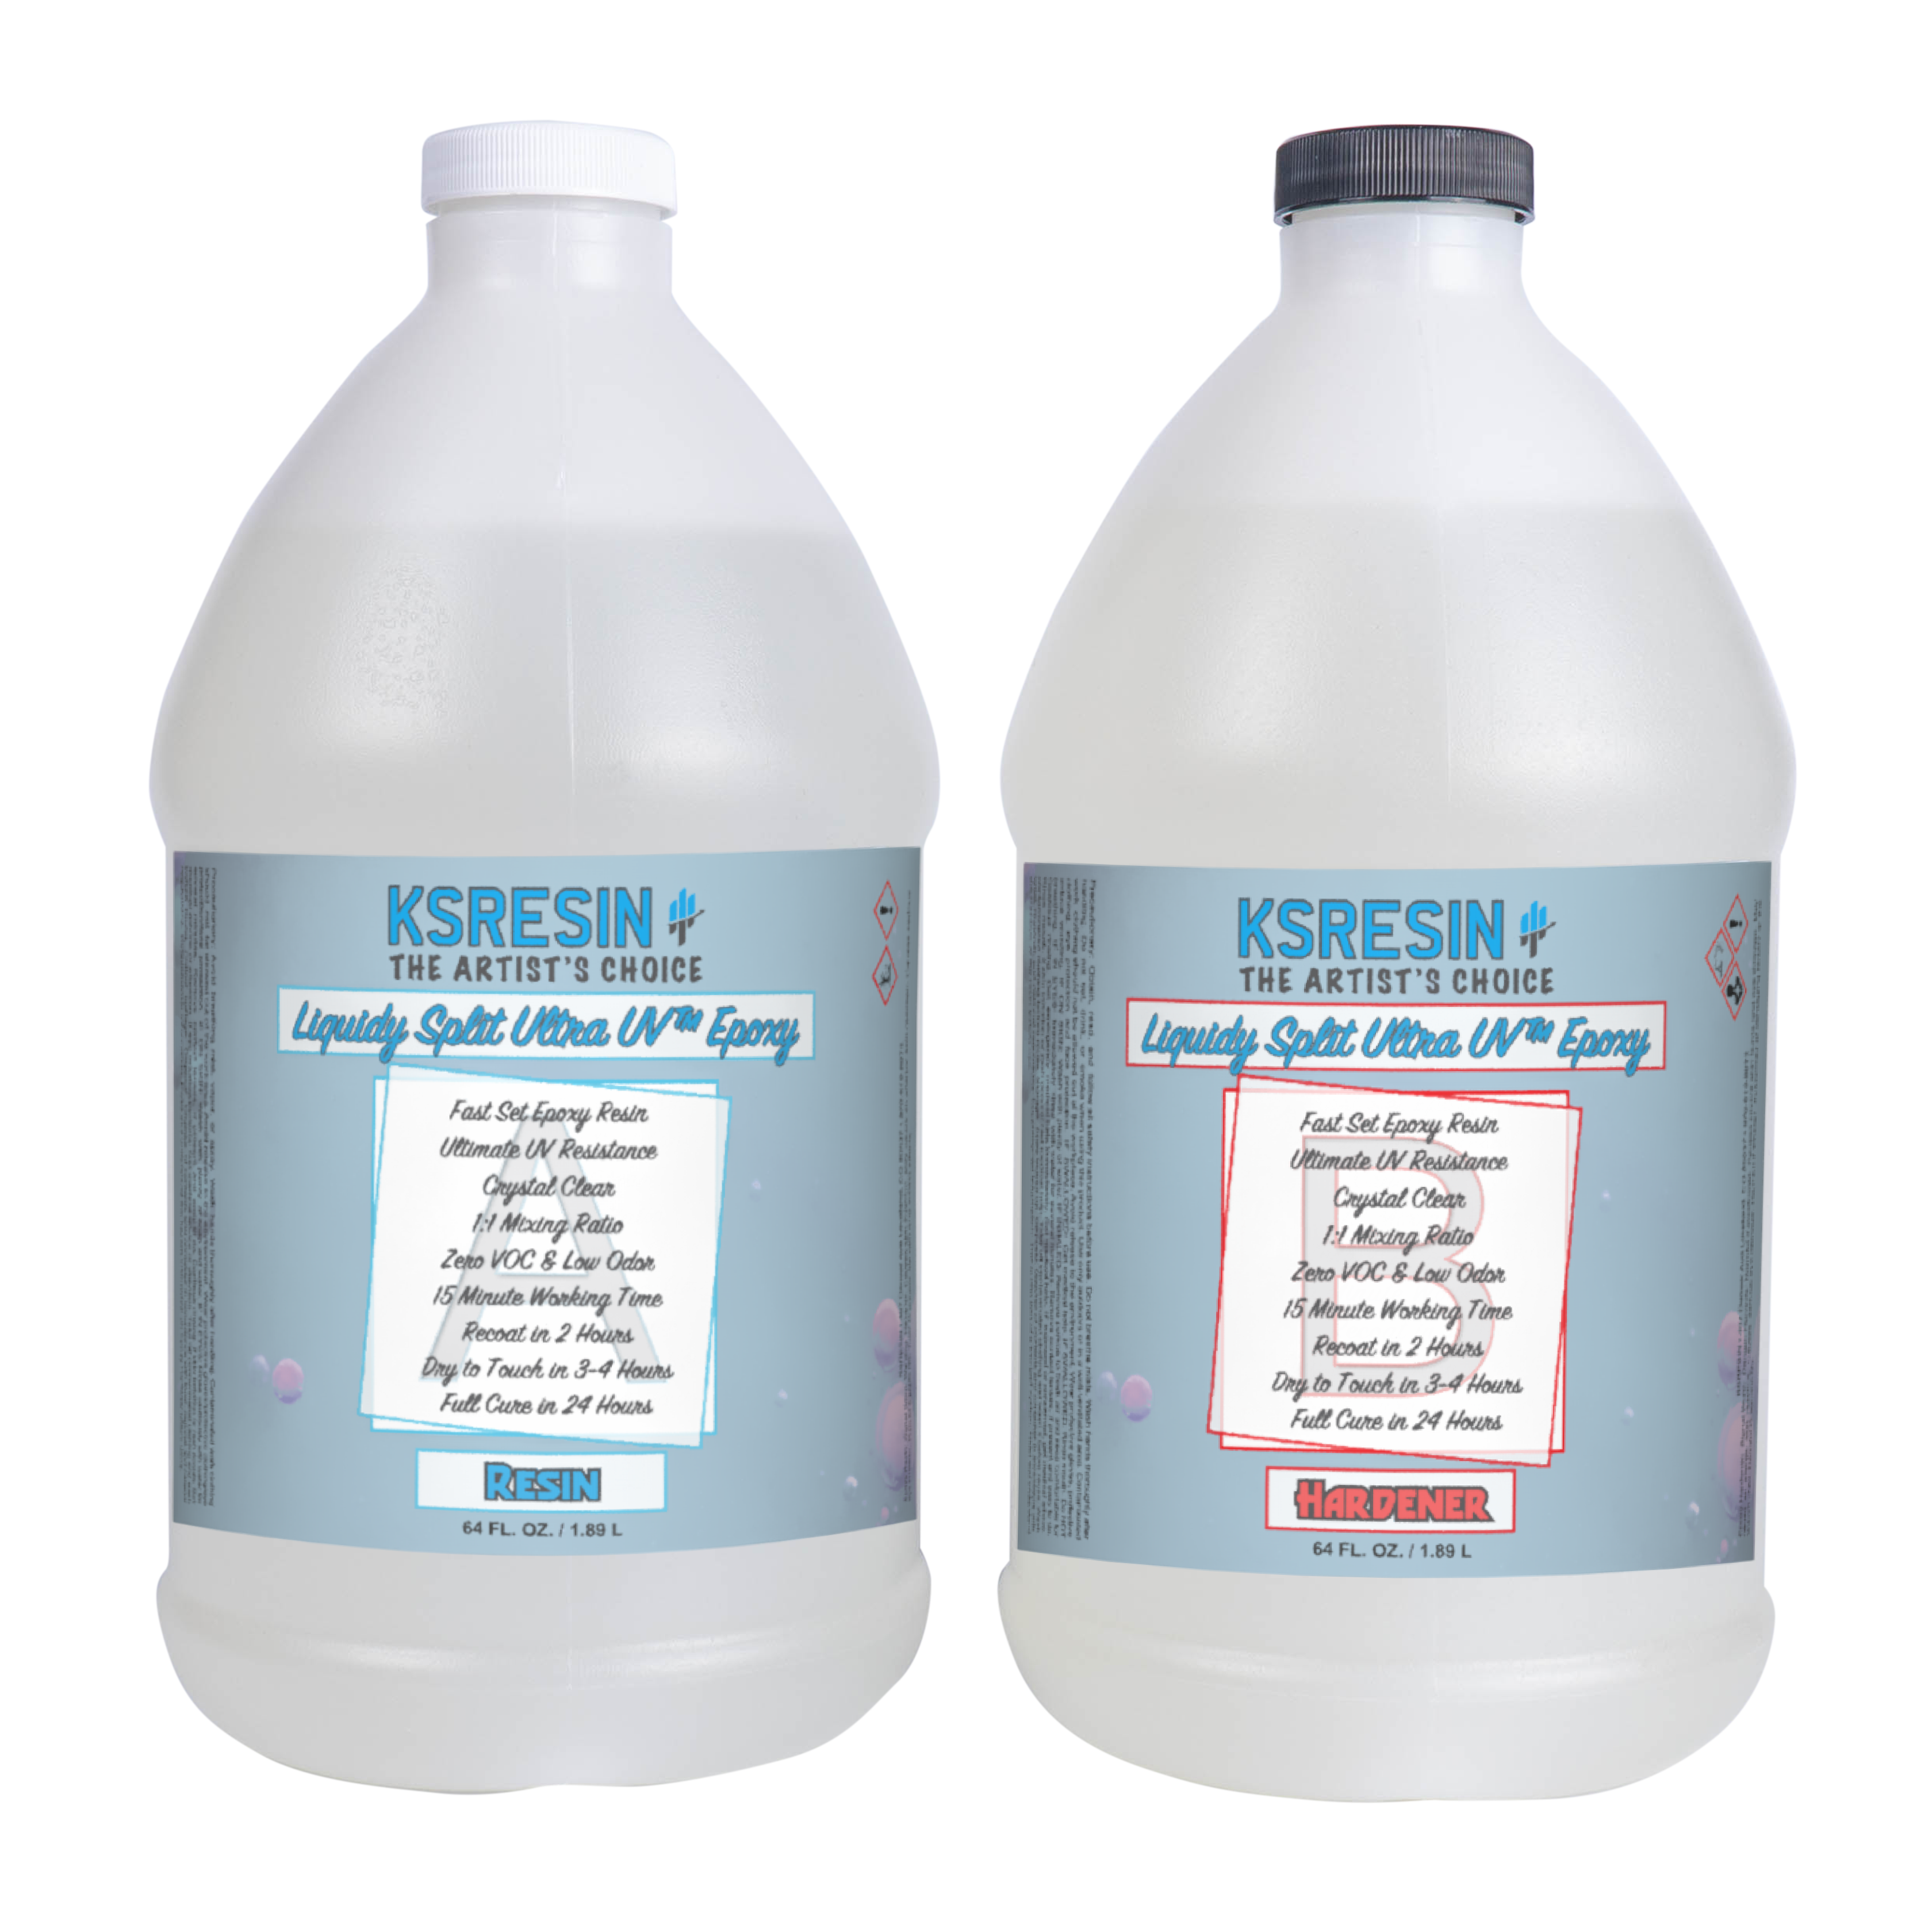 CLEAR WAVE Epoxy Resin 1-Gallon Resin Kit of Resin and Hardener Combined.  So